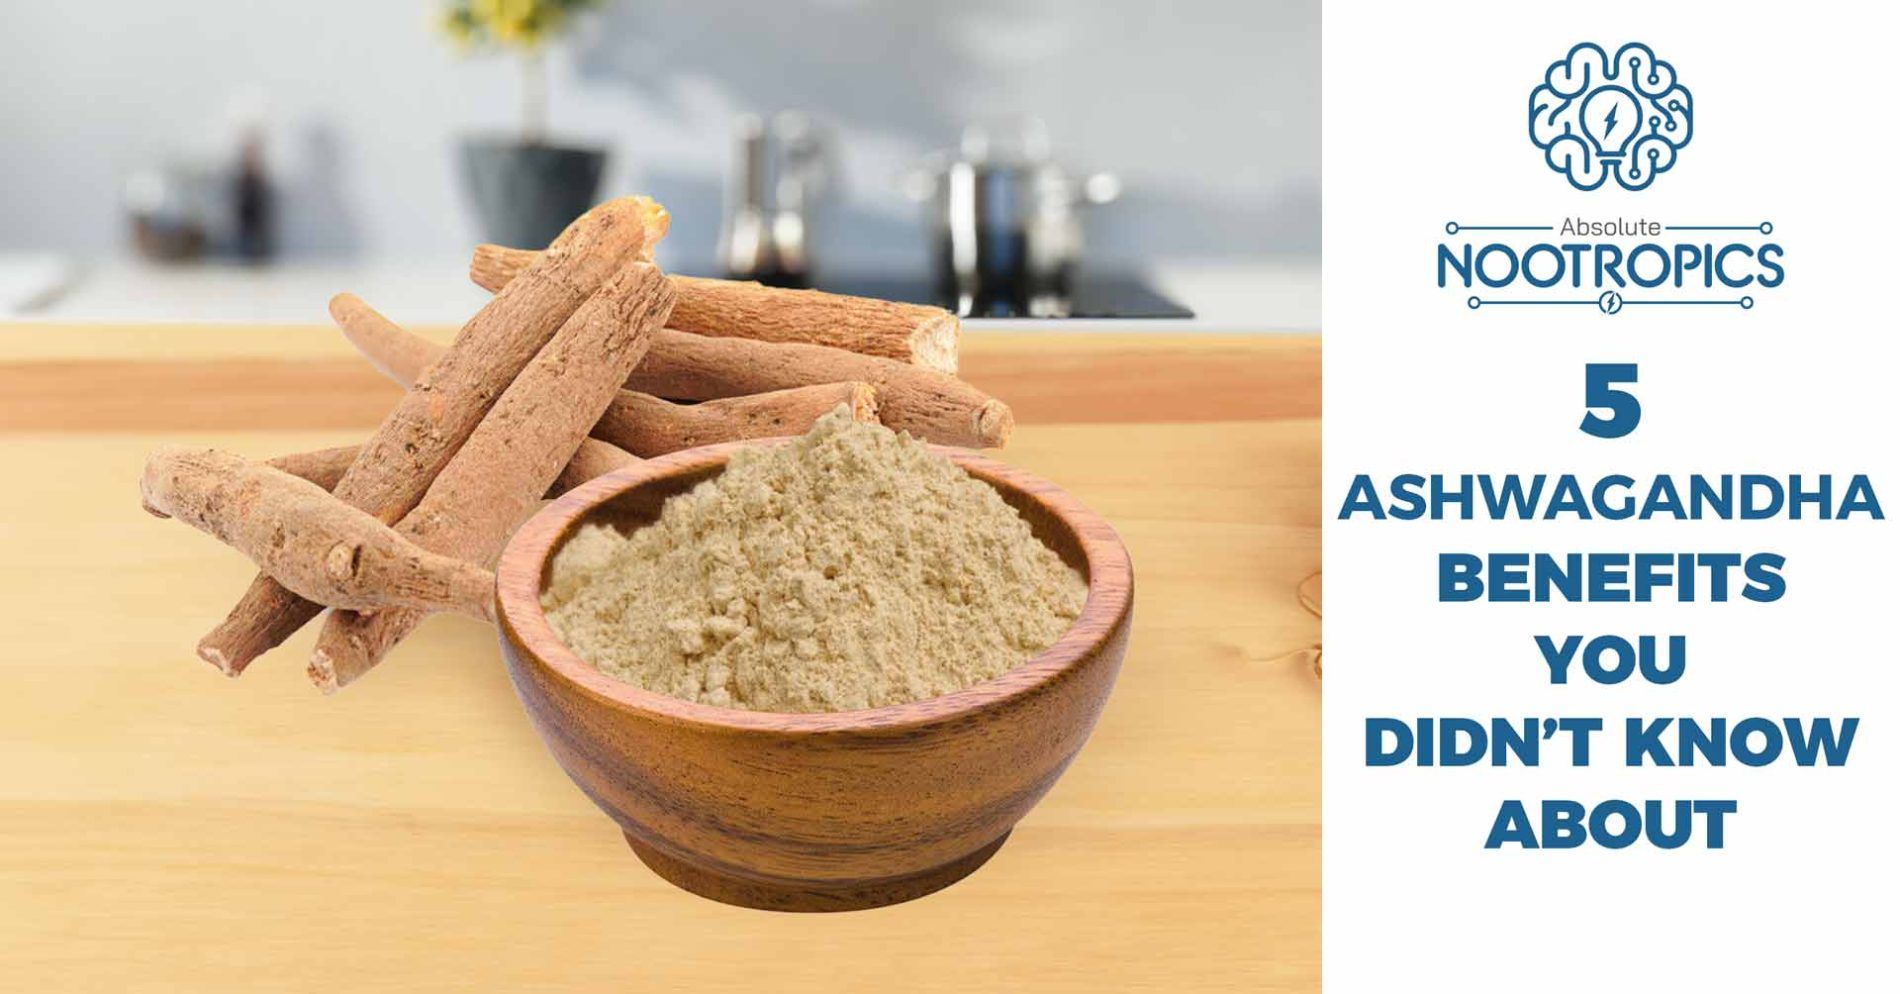 5 Ashwagandha Benefits You Didn’t Know About